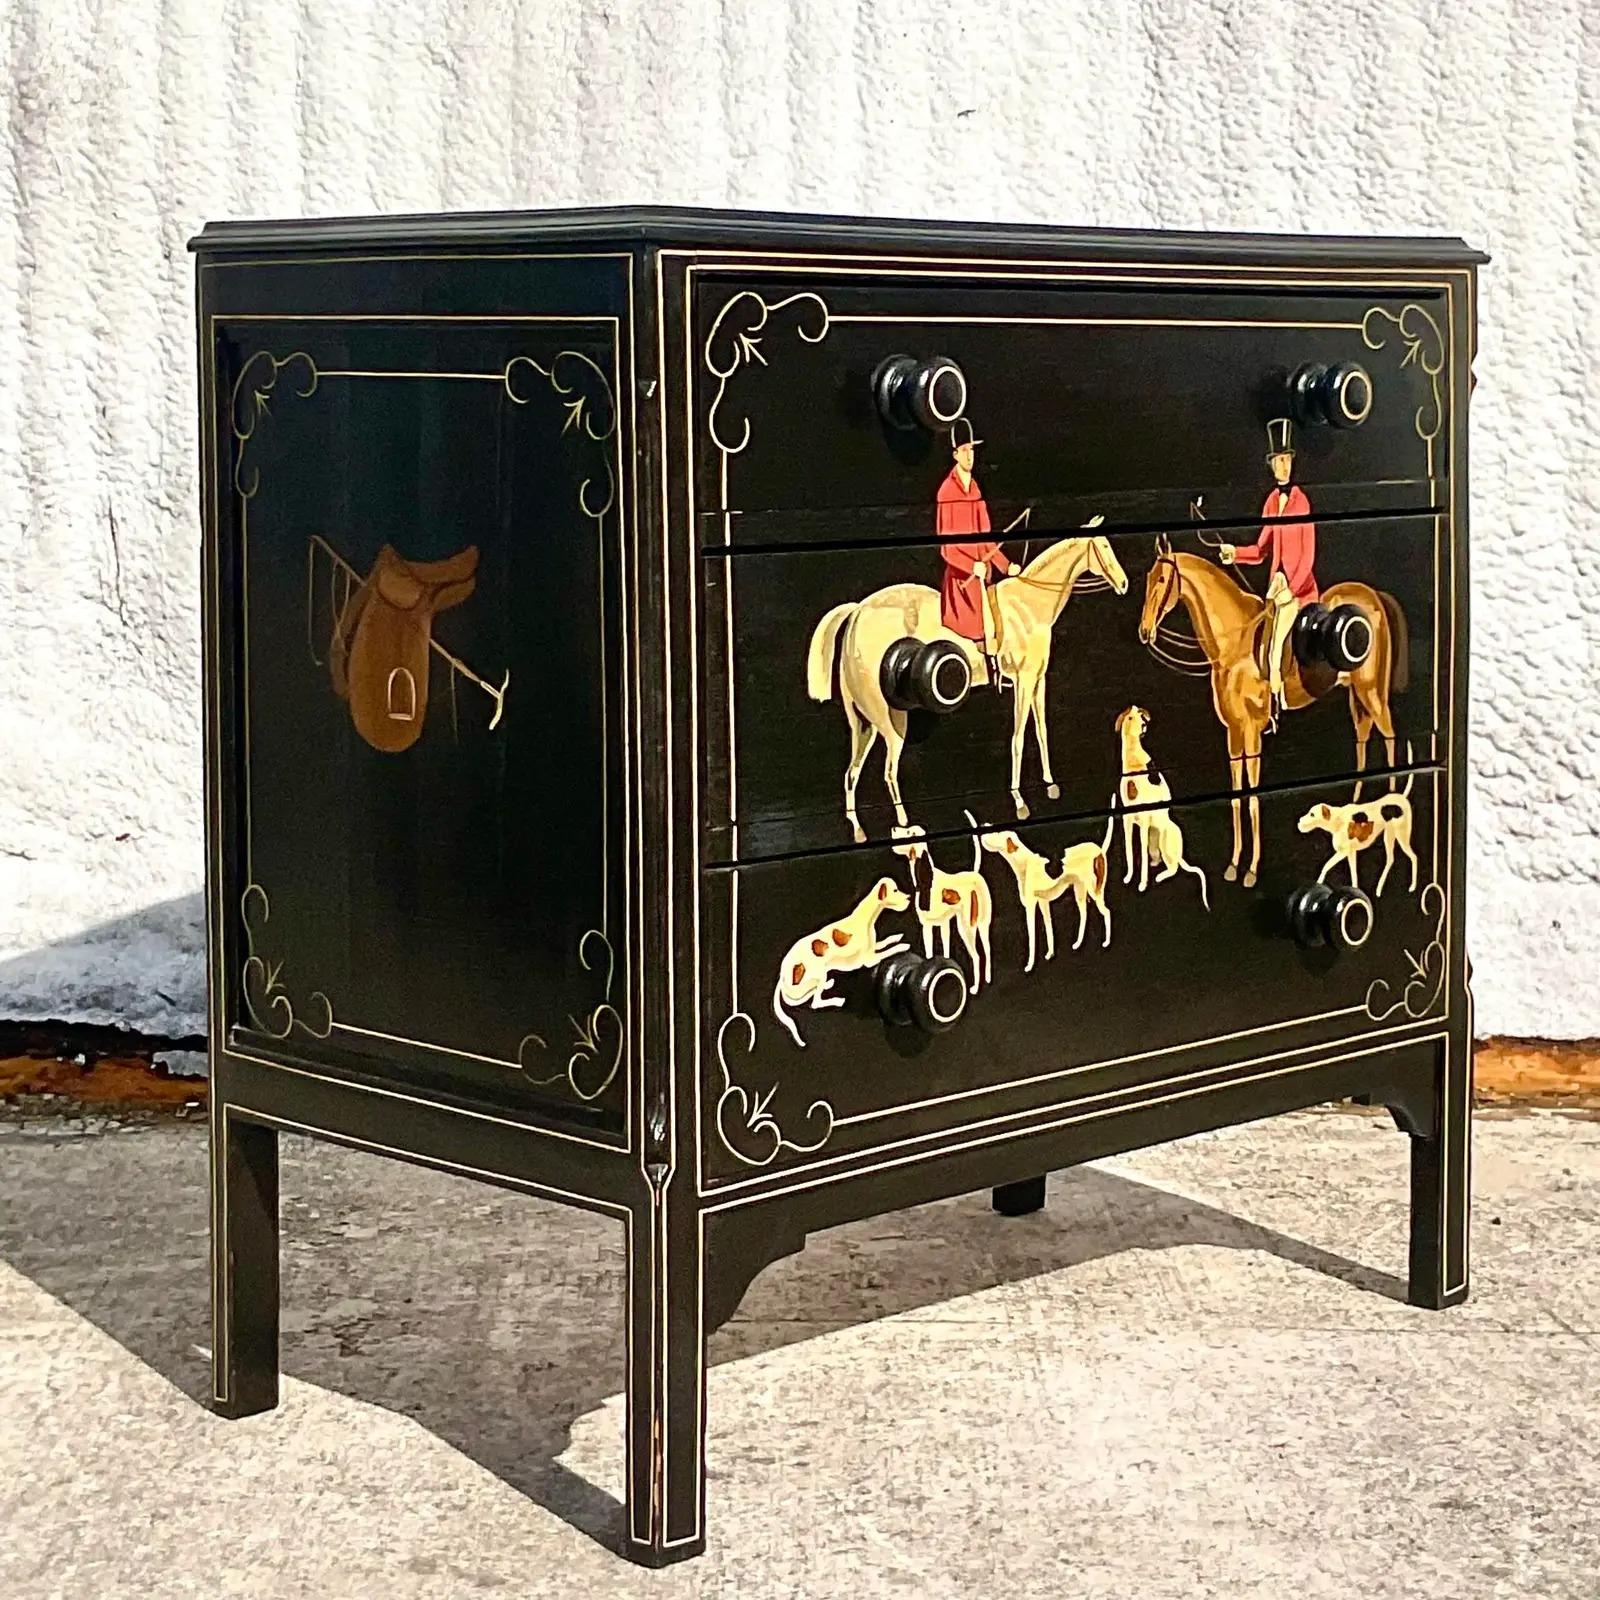 A fabulous vintage Regency chest of drawers. An antique piece that has been beautifully hand painted with scenes of a formal hunt. Lots of horses, dogs and men in full hunt wardrobe. A really special piece. Acquired from a Palm Beach estate.